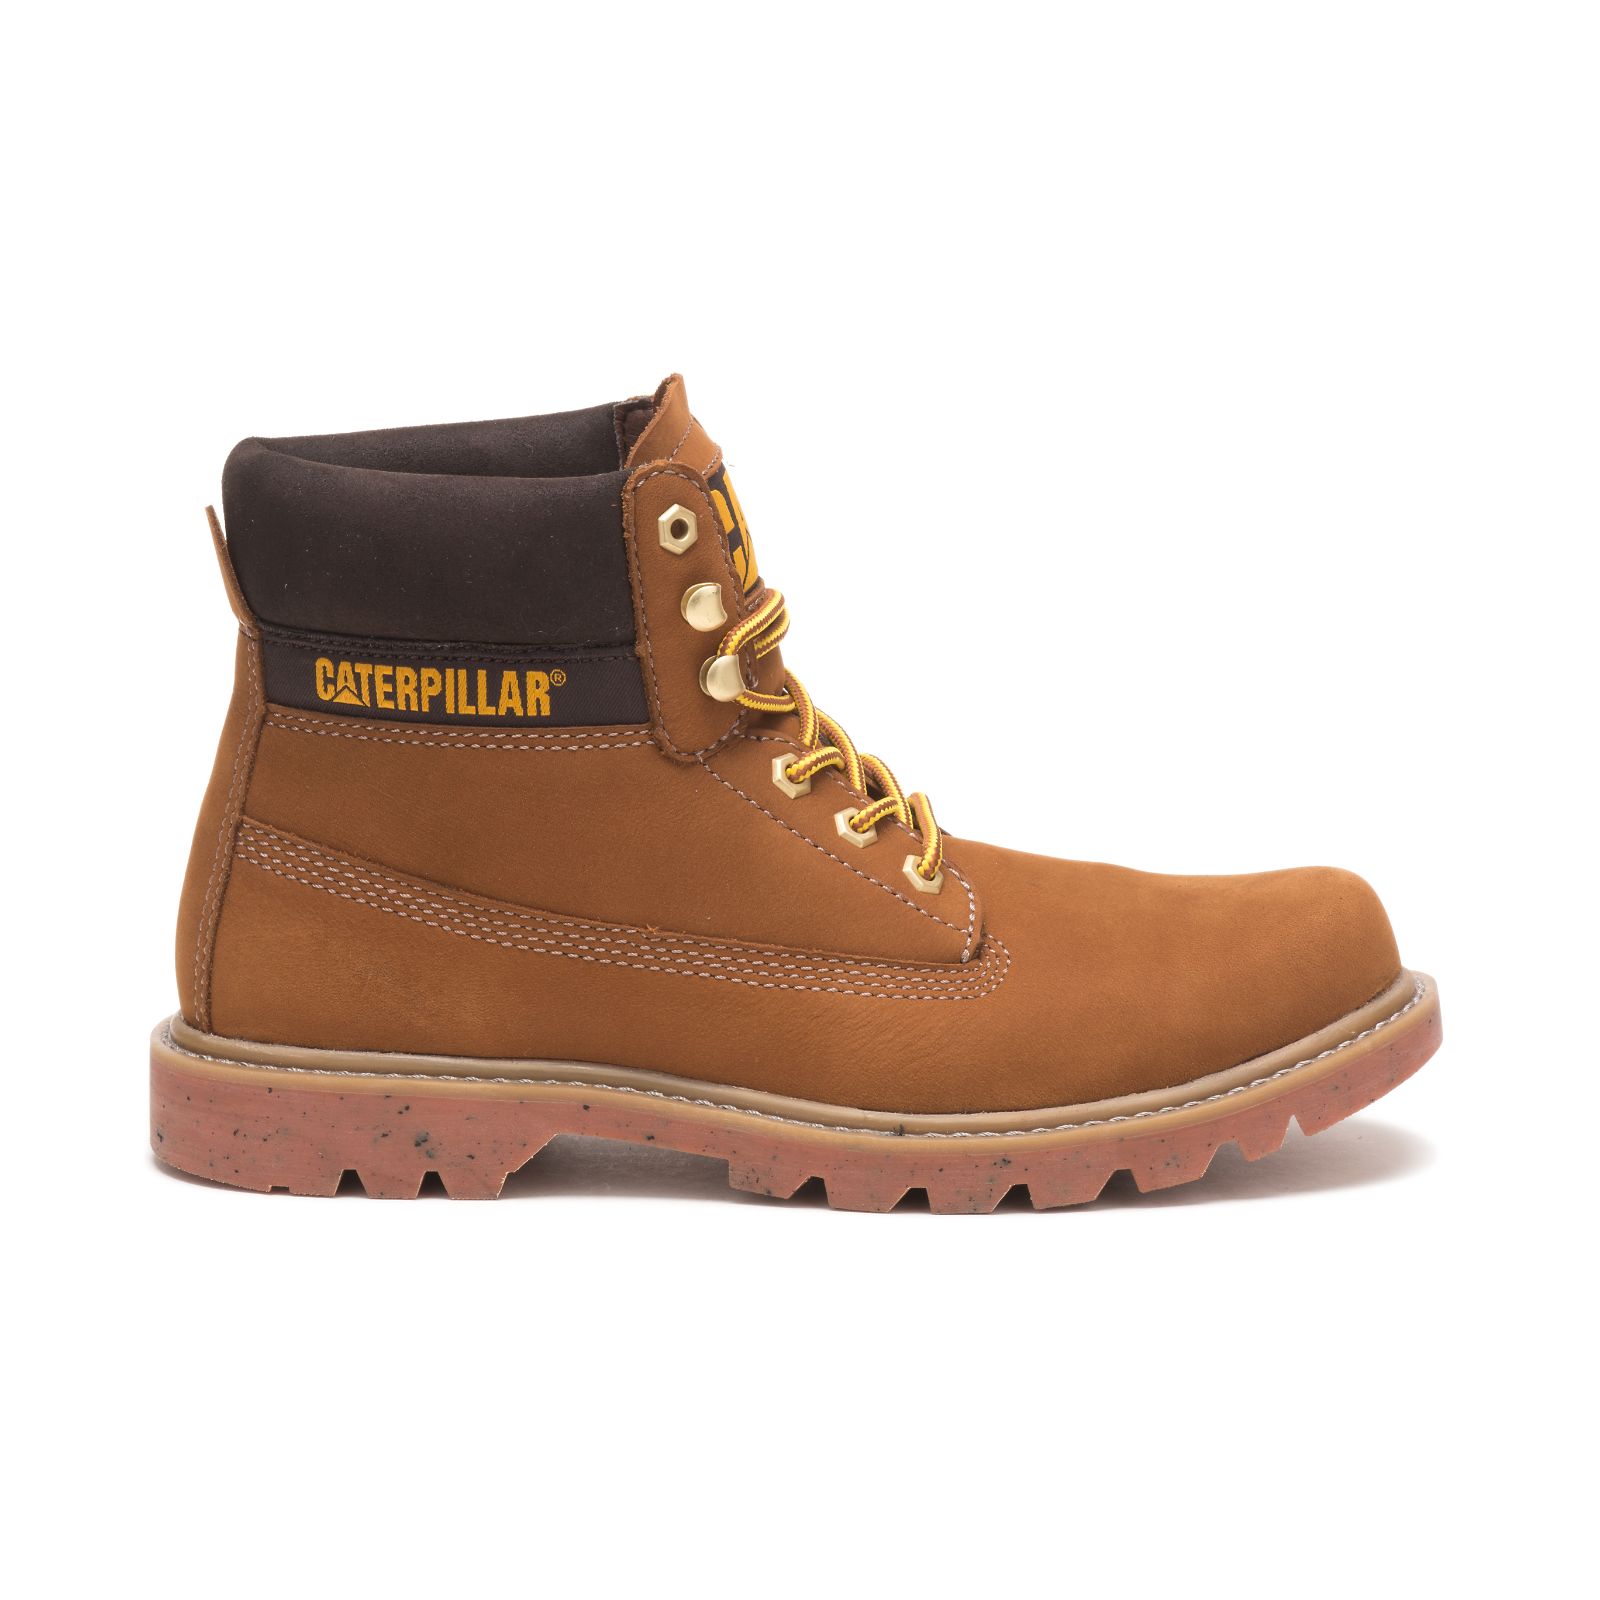 Caterpillar Ecolorado Philippines - Womens Casual Boots - Brown 90234ADXI